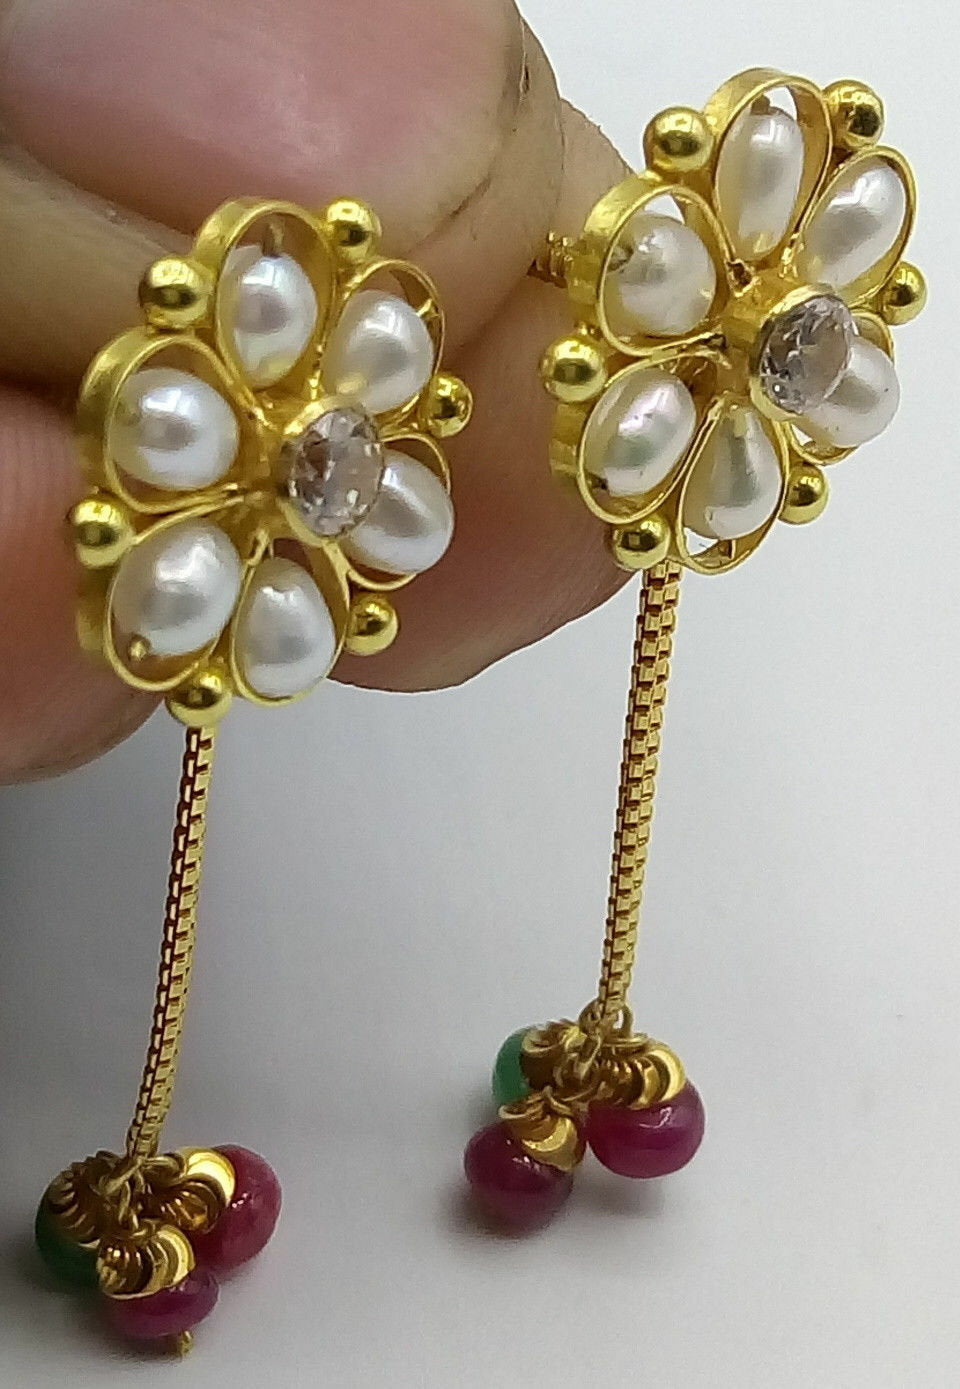 Certified 22kt yellow gold handmade fabulous earring dangling jewelry with gorgeous color beads and box chain antique style jewelry - TRIBAL ORNAMENTS